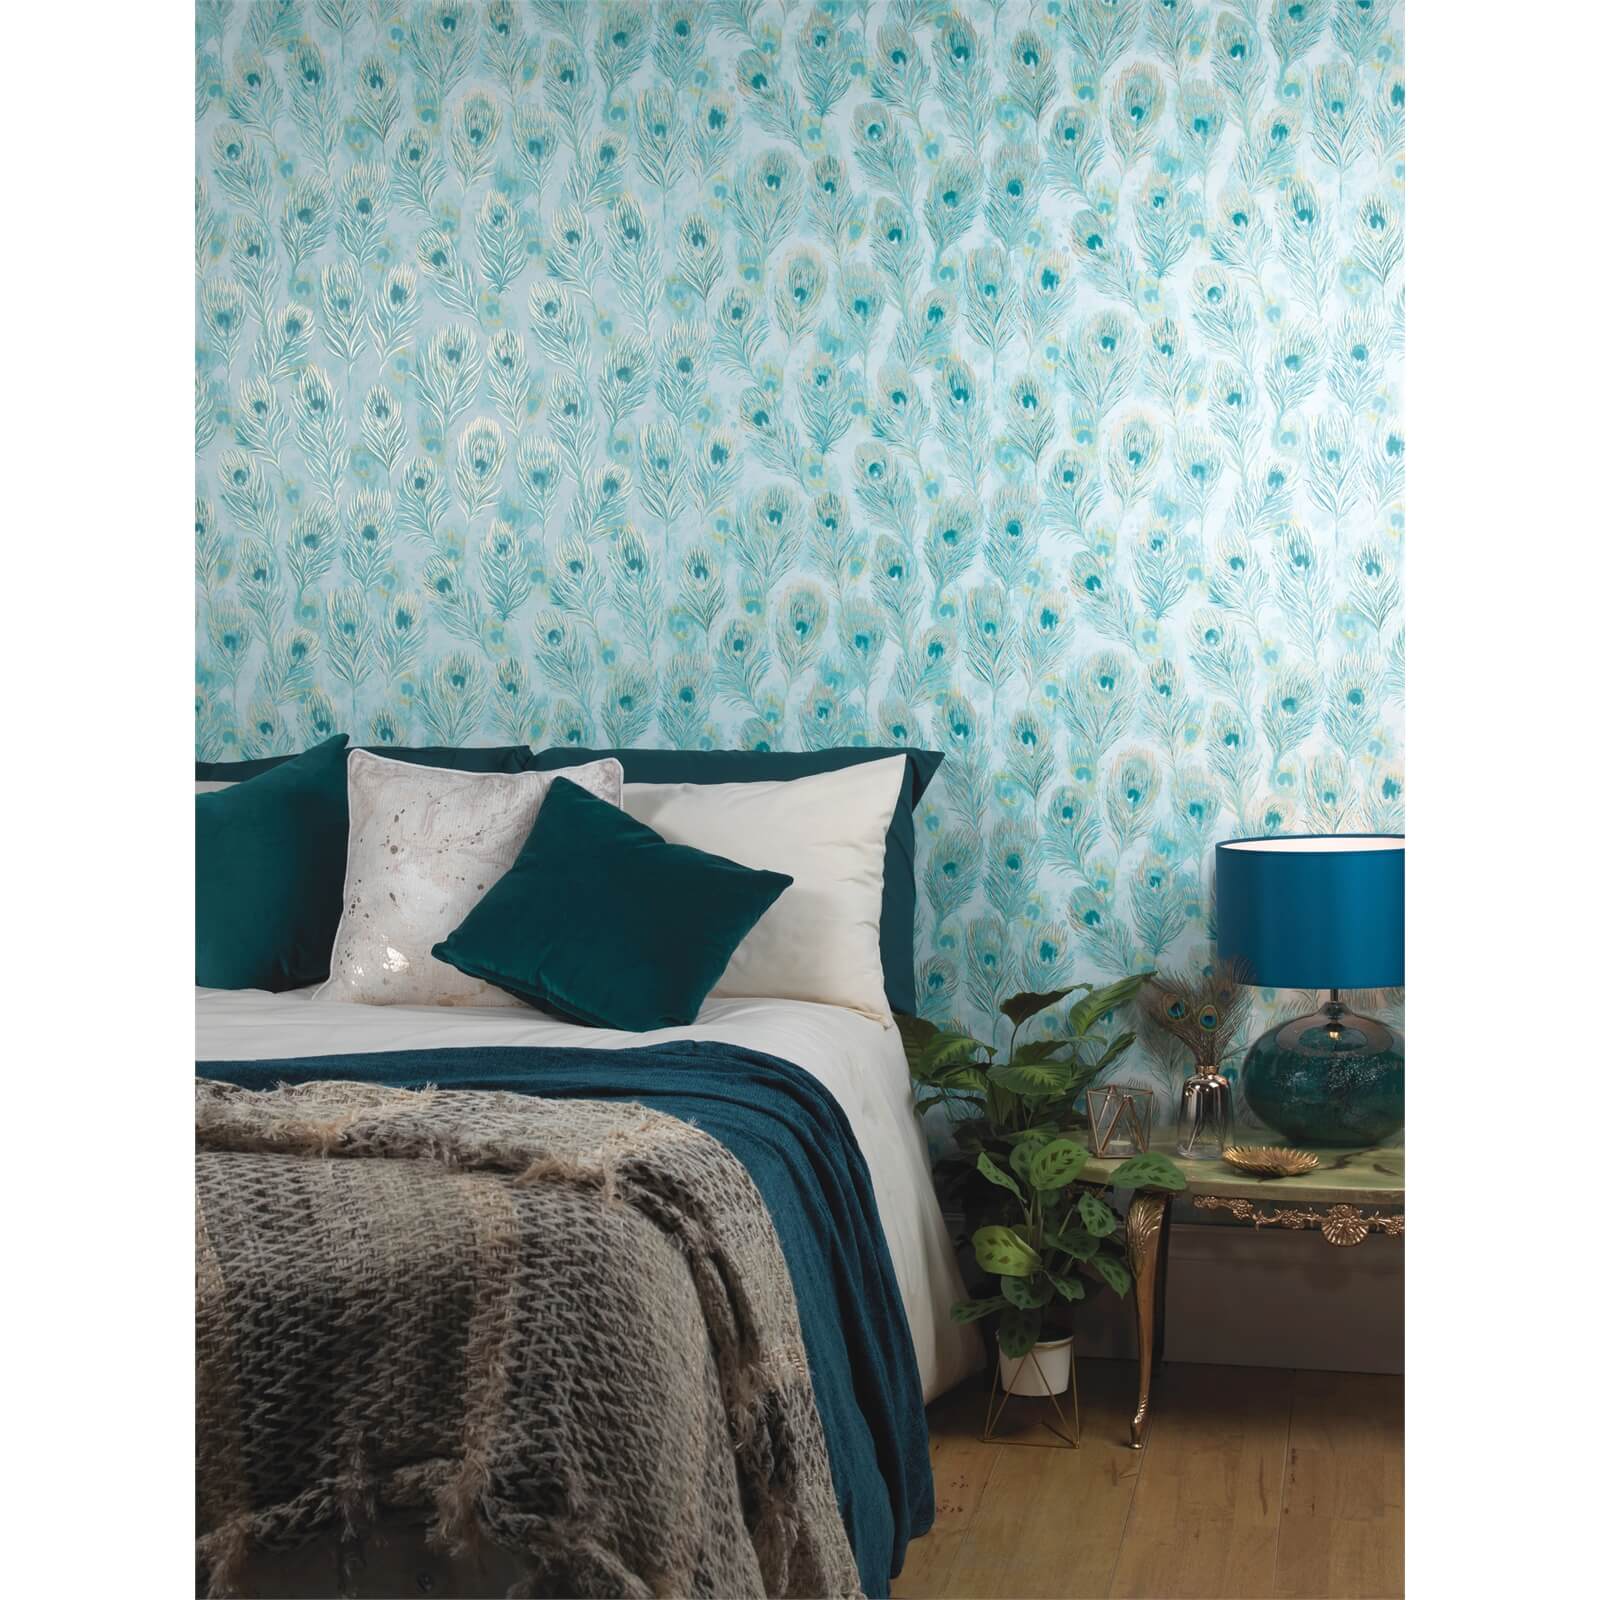 Holden Decor Pinion Feathers Smooth Metallic Teal Wallpaper